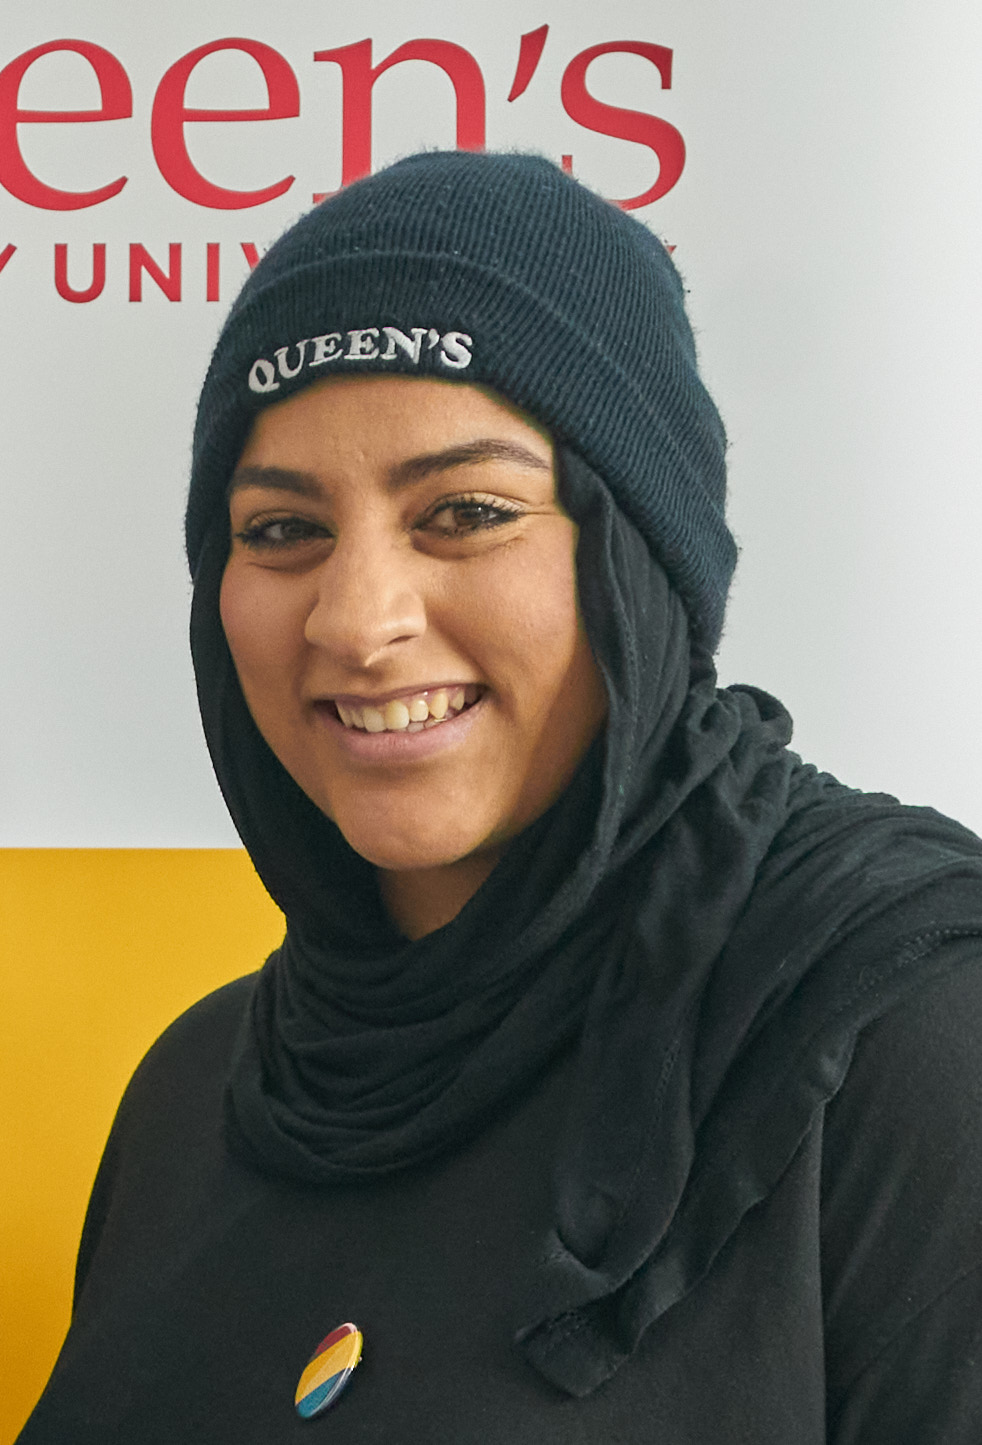 Head shot of Israa smiling after receiving the award.